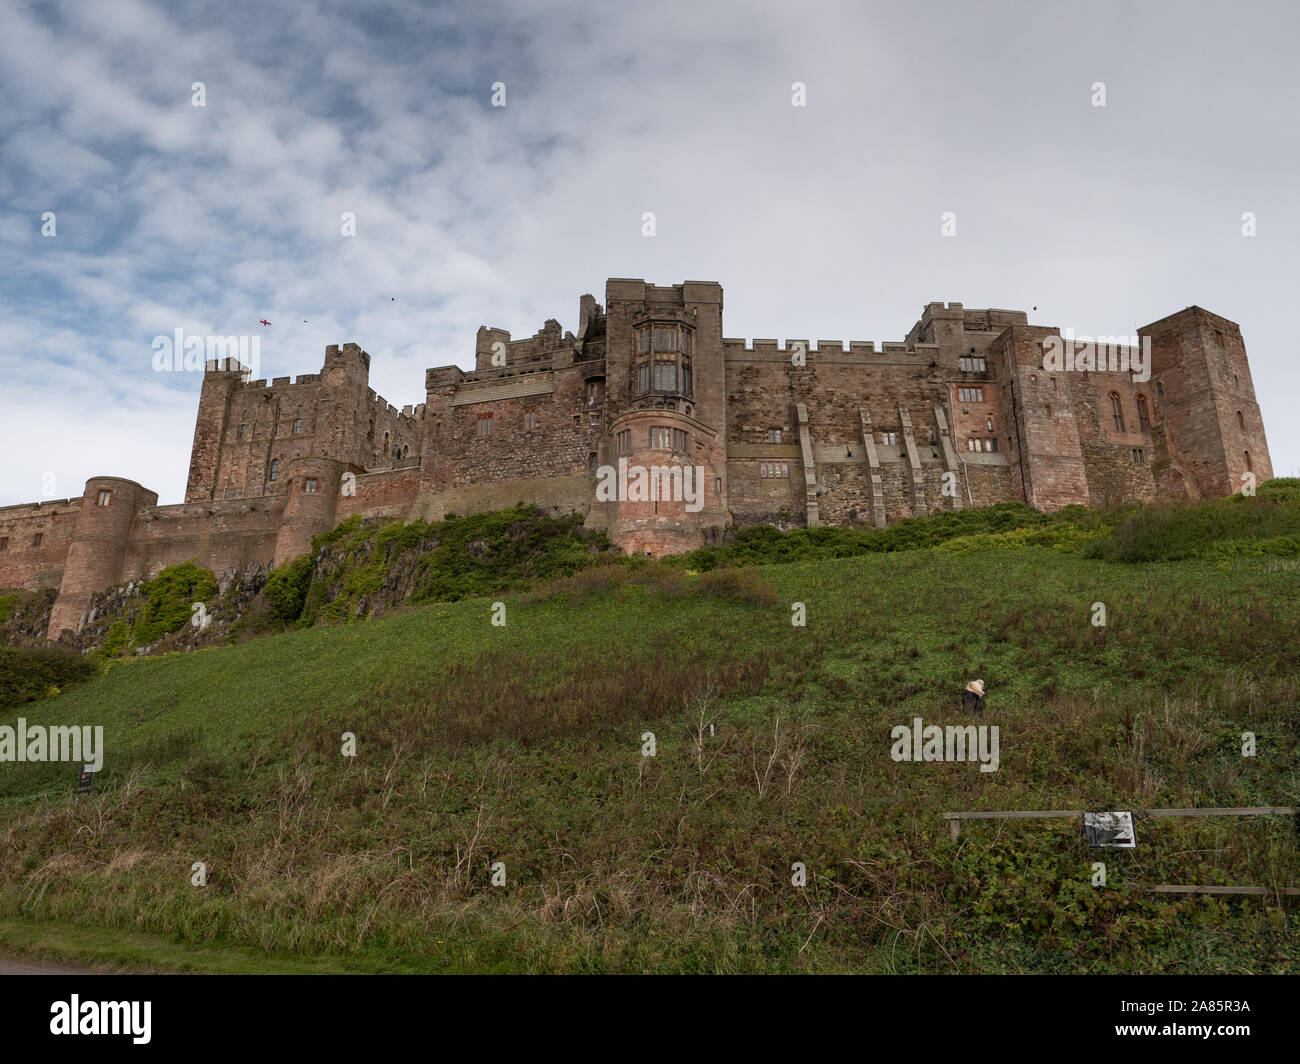 Looking up at The West Walls of Bamburgh Castle, Northumberland, UK. Stock Photo